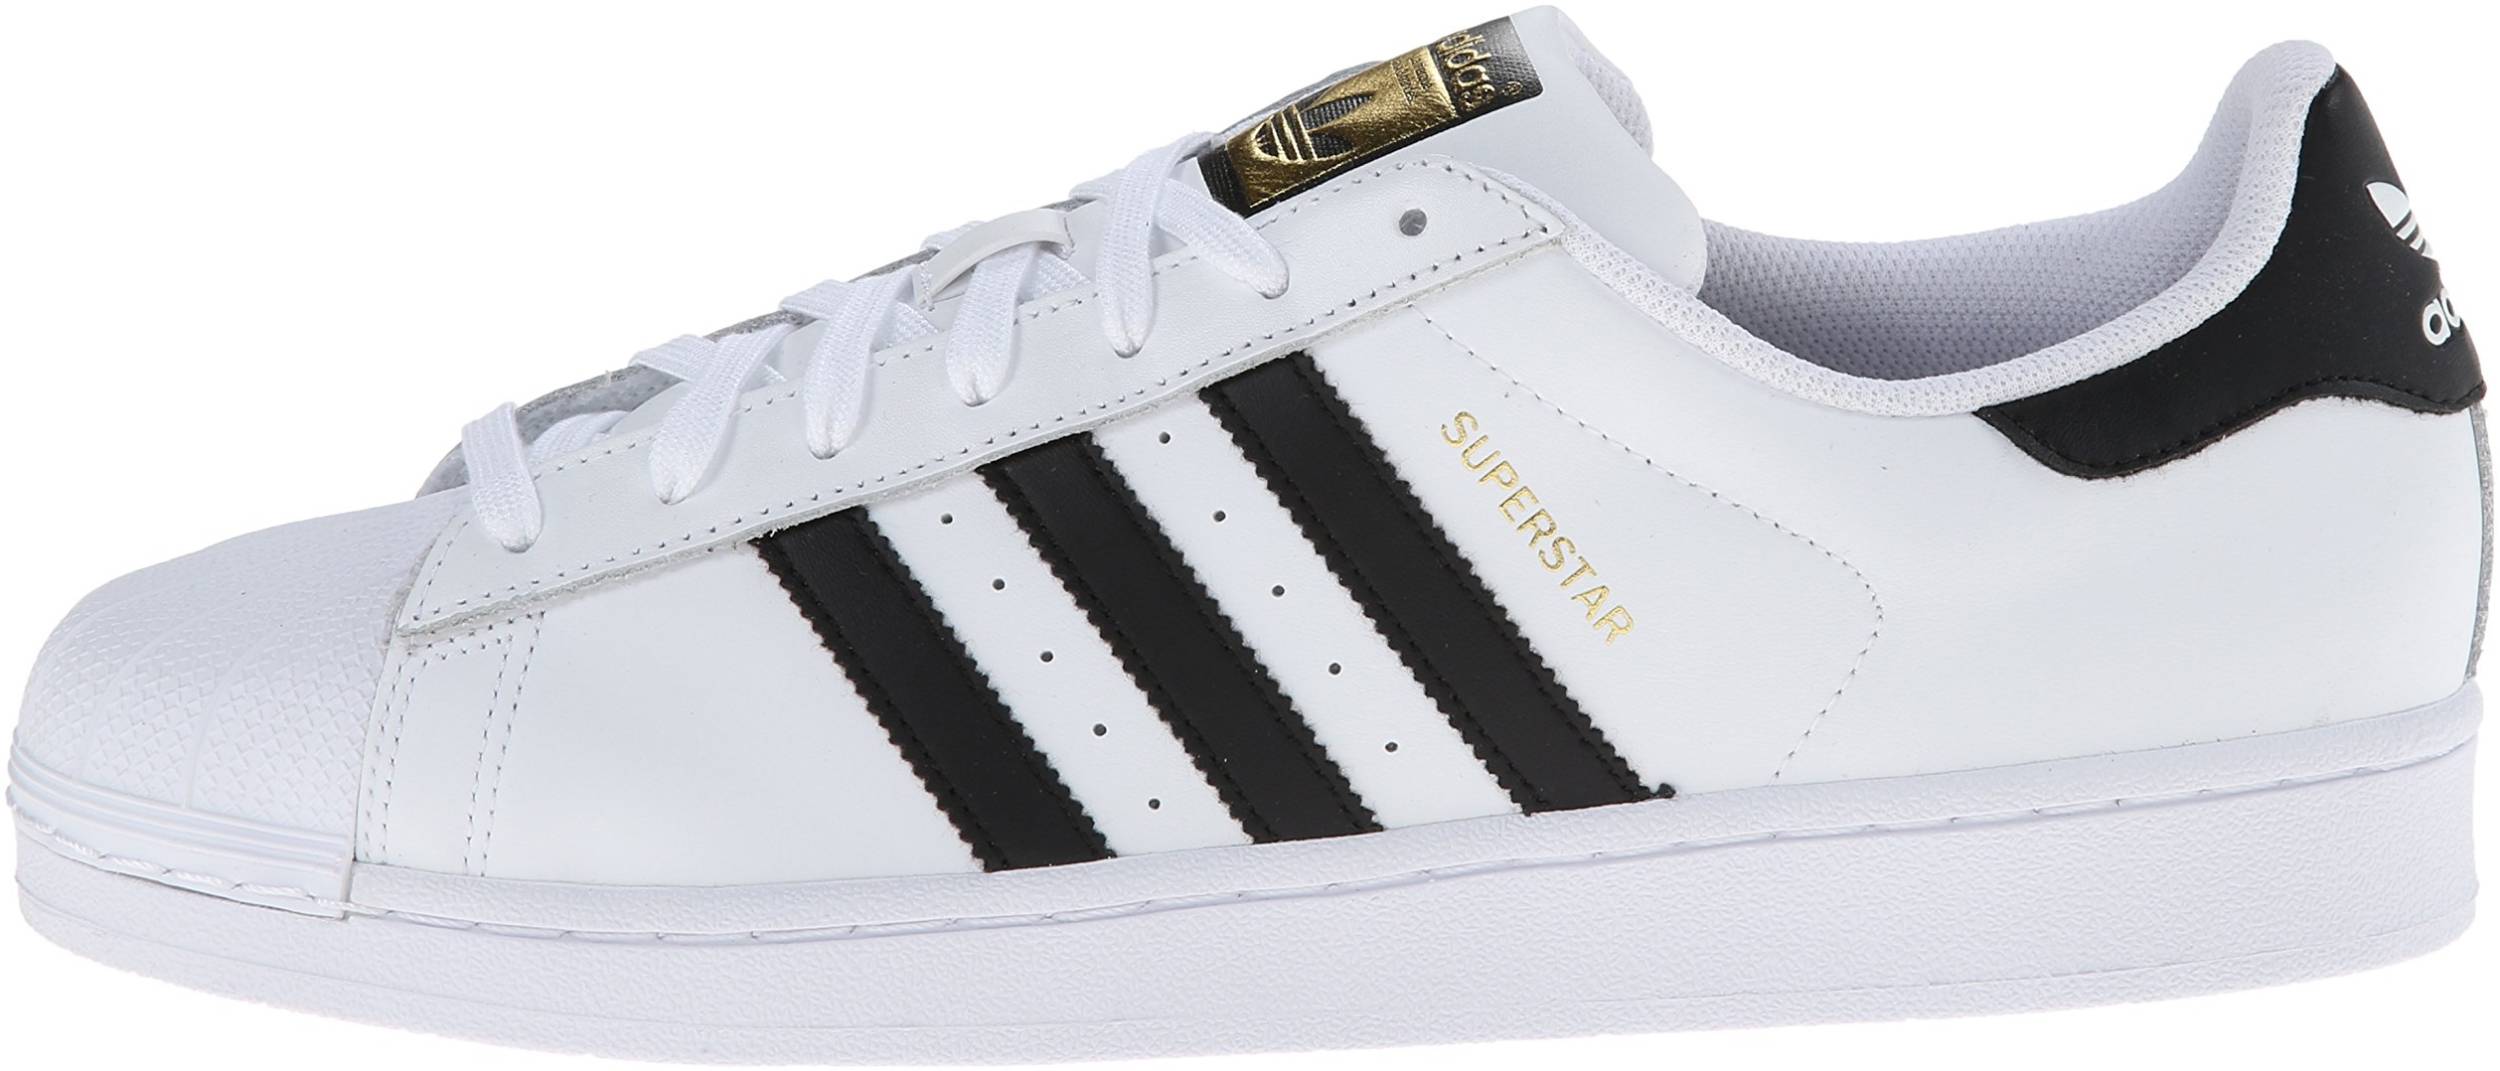 40+ colors of Adidas Superstar (from $19) | RunRepeat